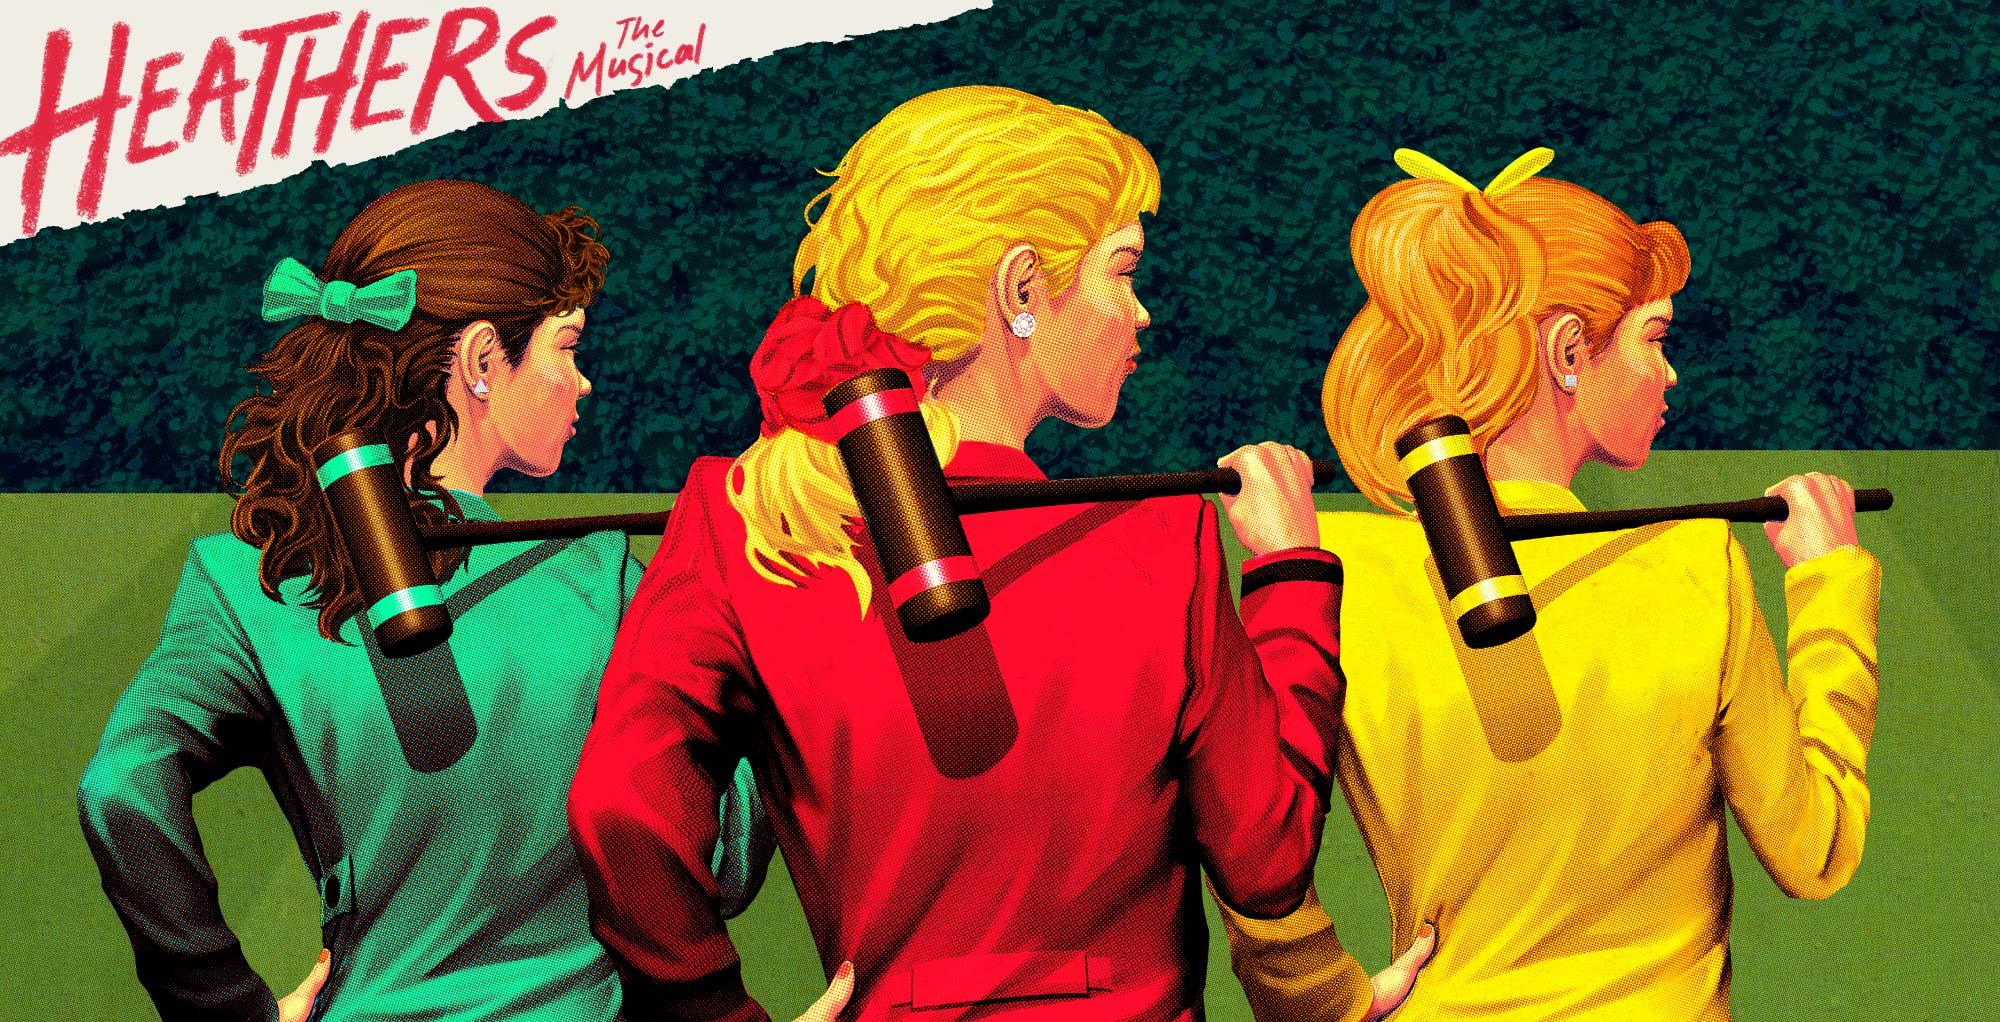 Now available to perform: Heathers. Pardon My French